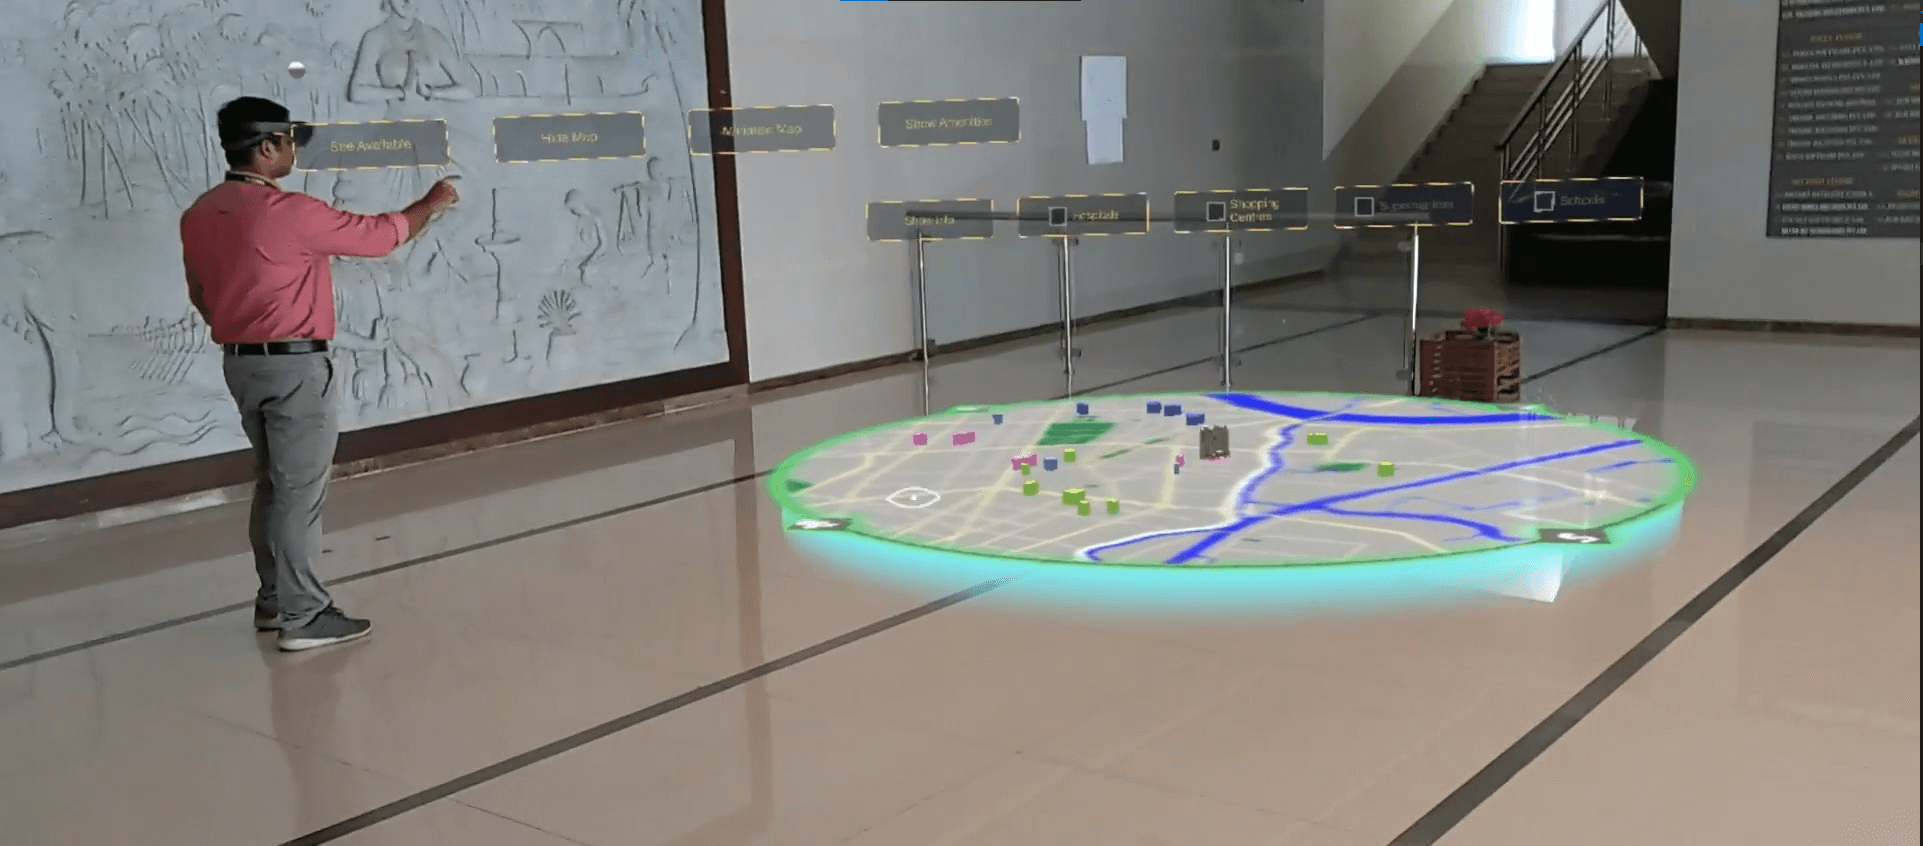 Building visualization in mixed reality using Microsoft HoloLens